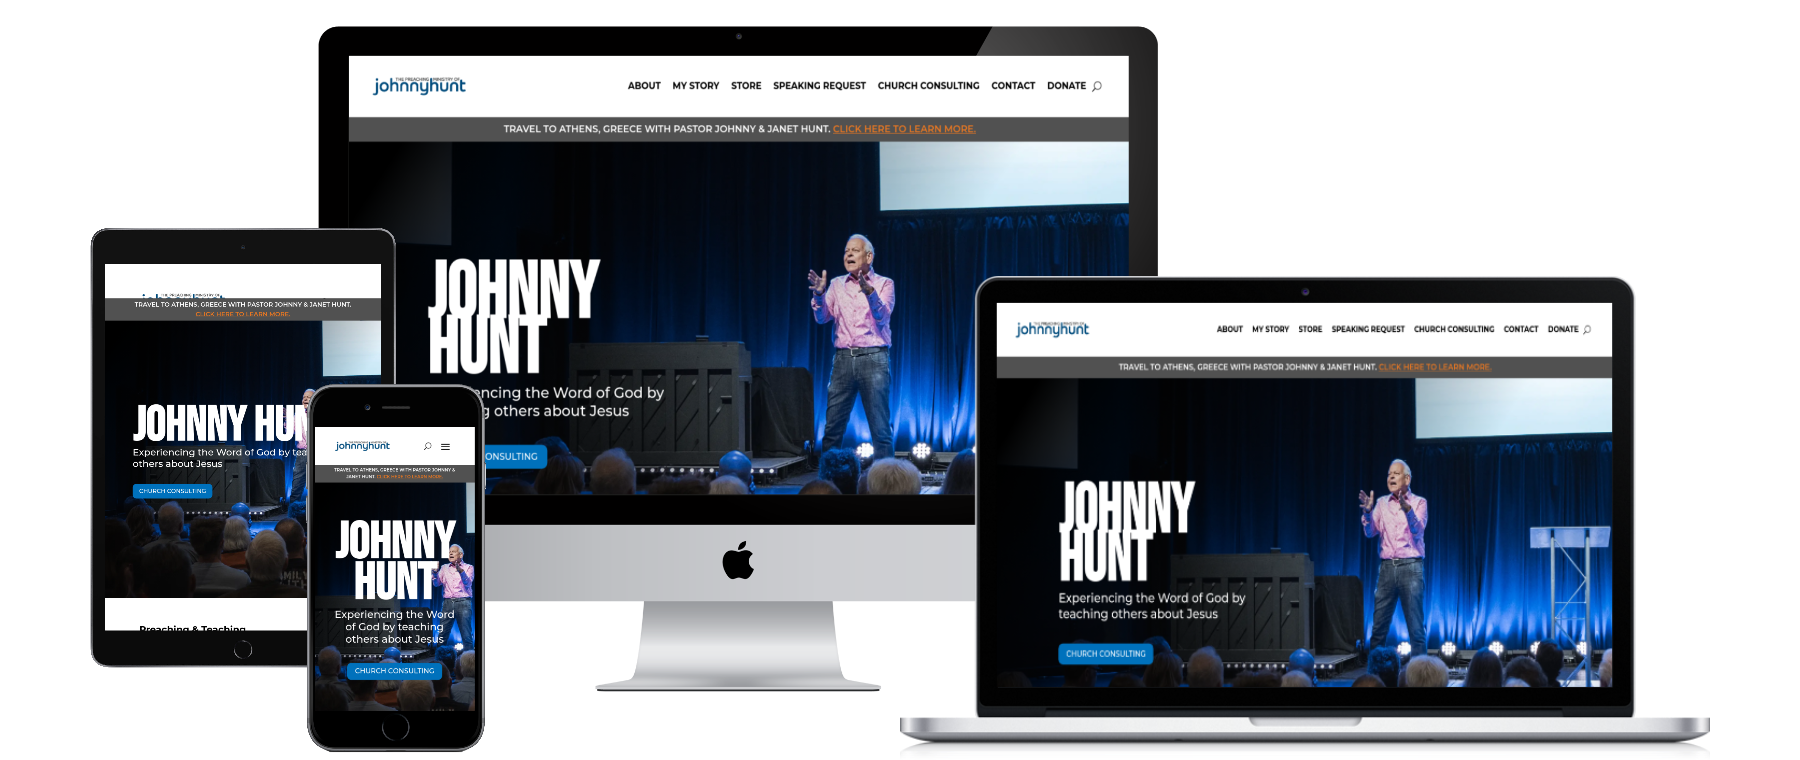 All versions of the Johnny Hunt website